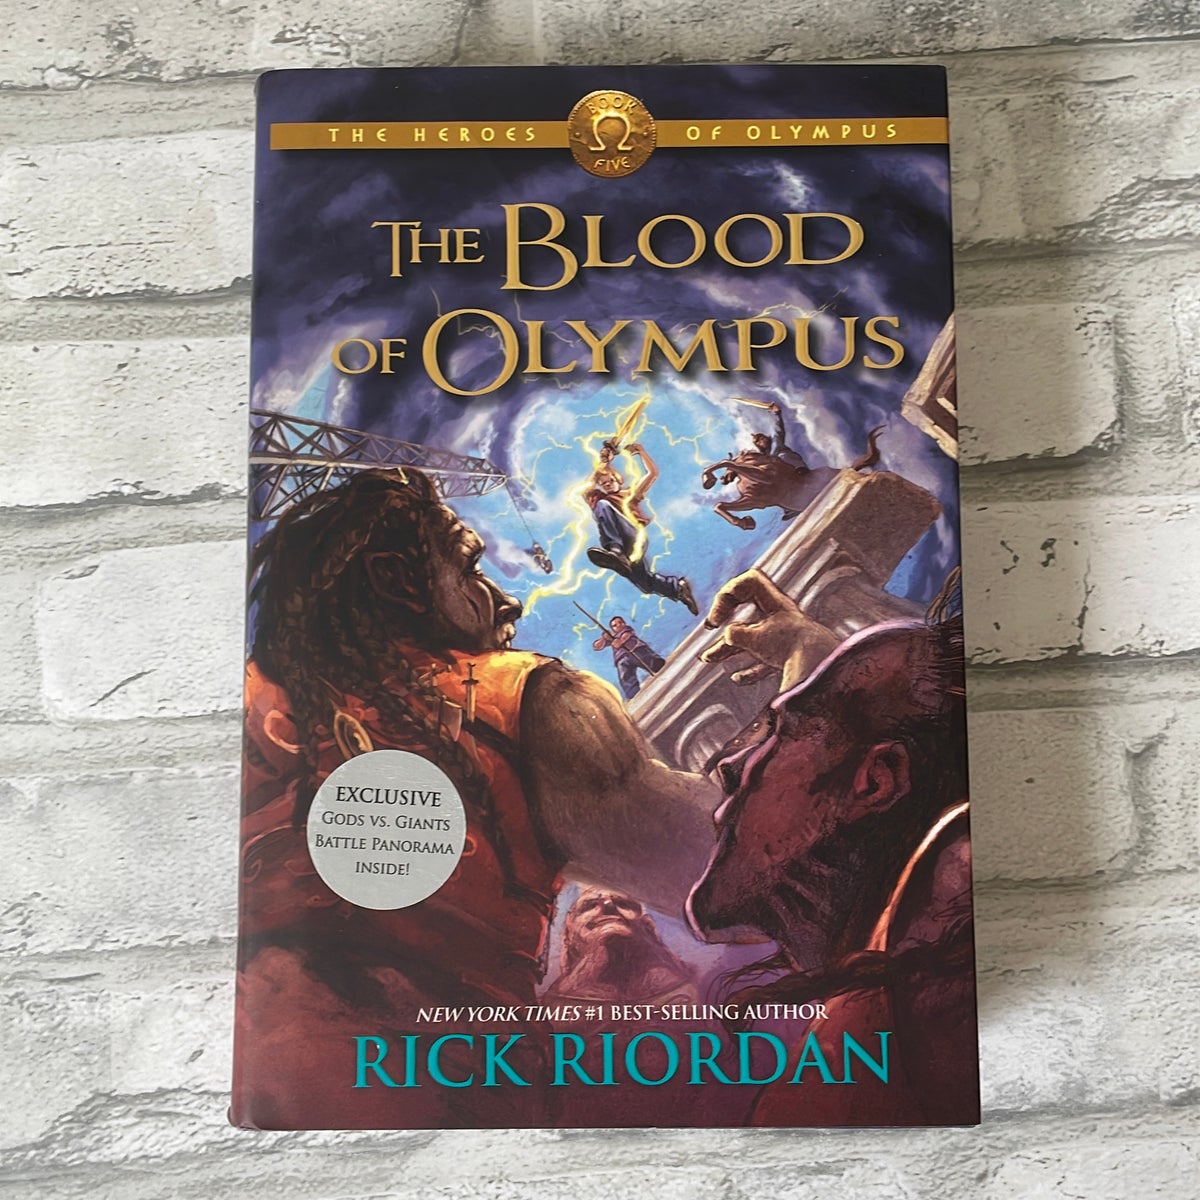 The Blood Of Olympus (Barnes & Noble Special Edition)